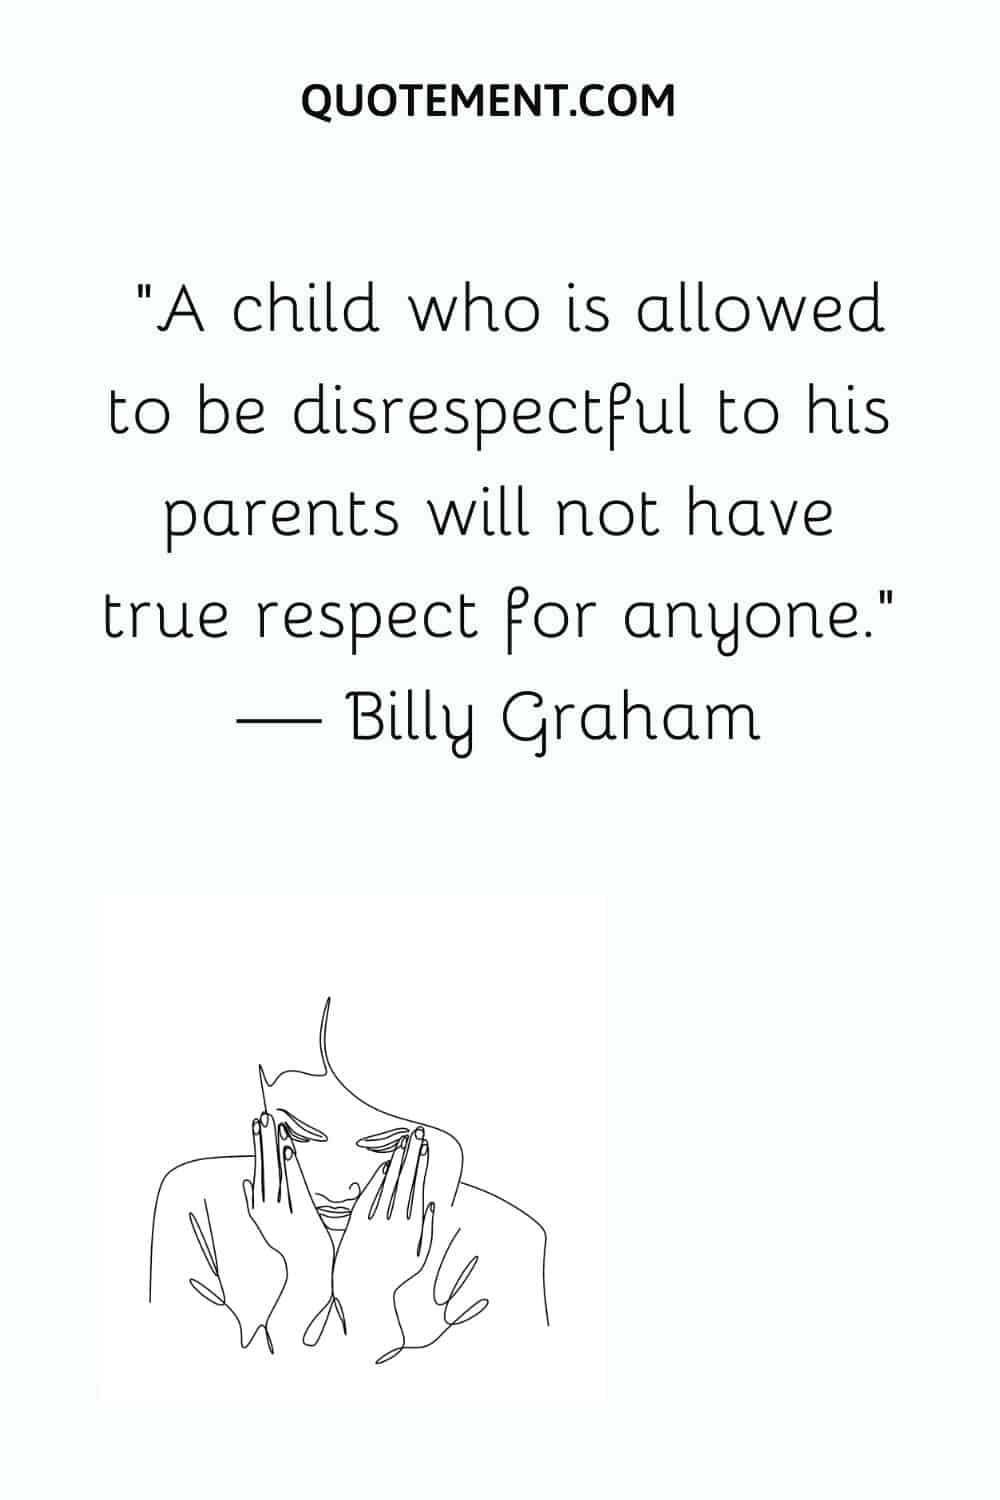 A child who is allowed to be disrespectful to his parents will not have true respect for anyone